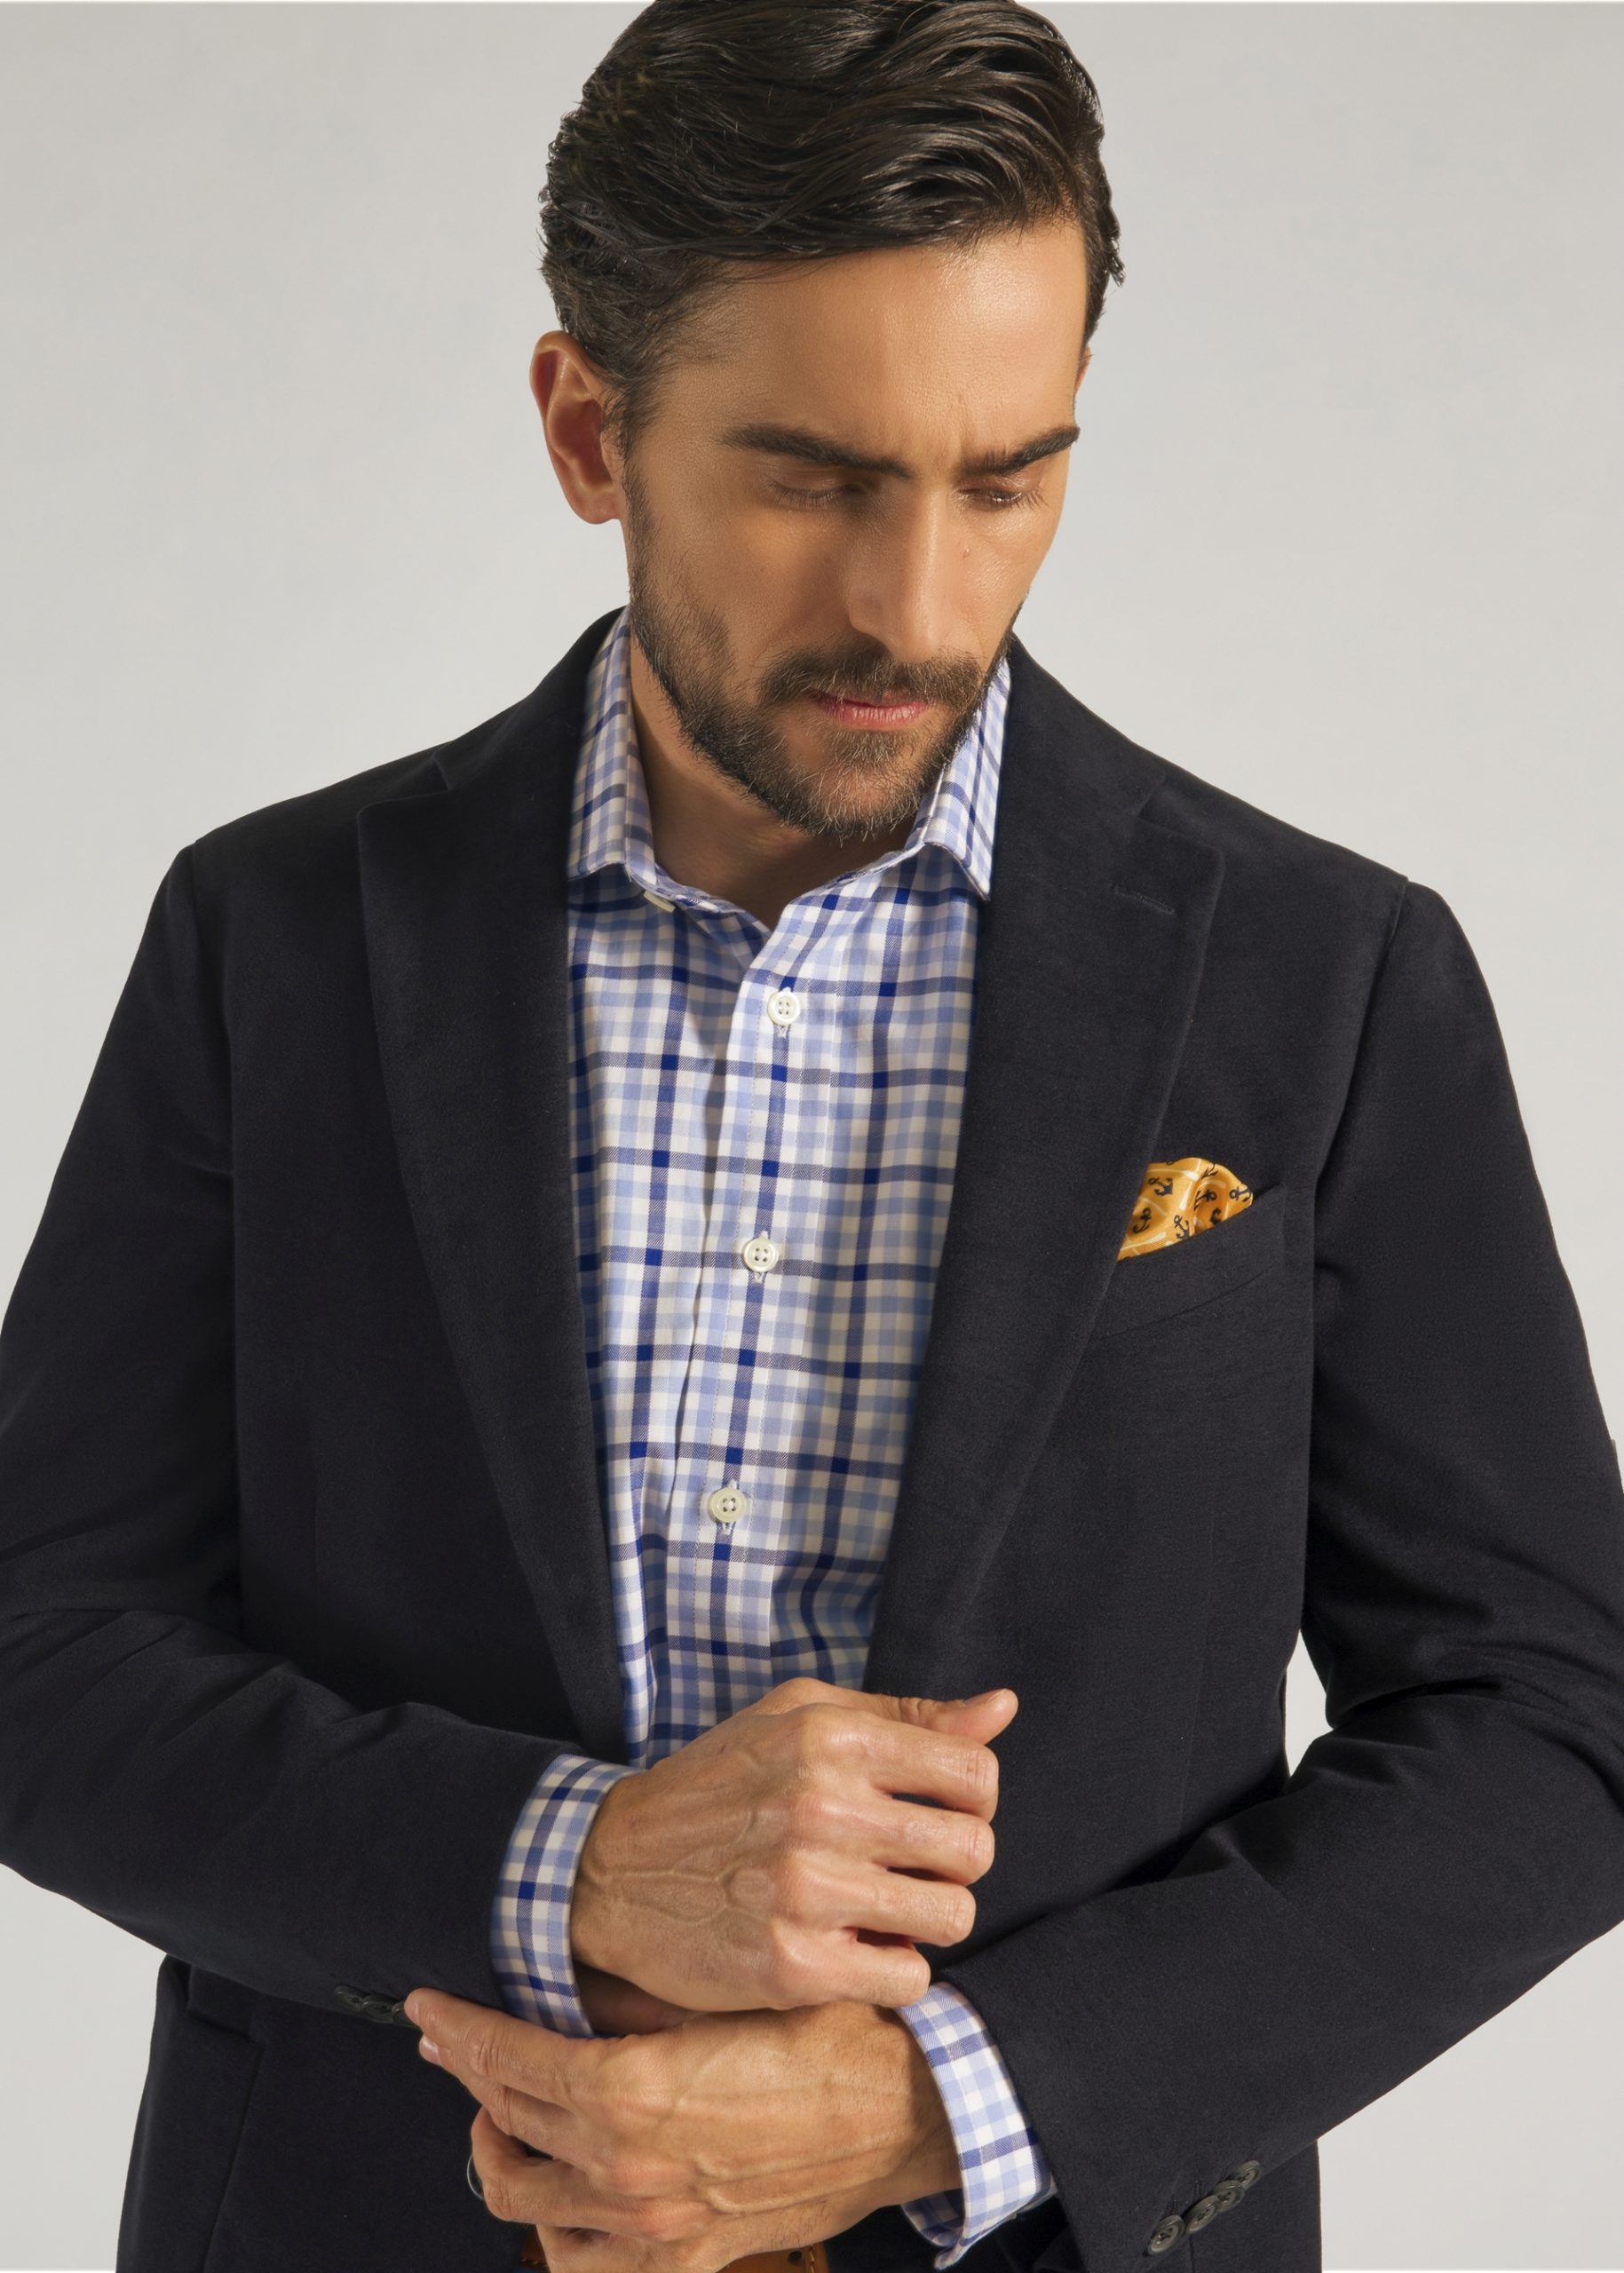 Bertie Wooster moleskin jacket in navy blue styled with blue and white check shirt